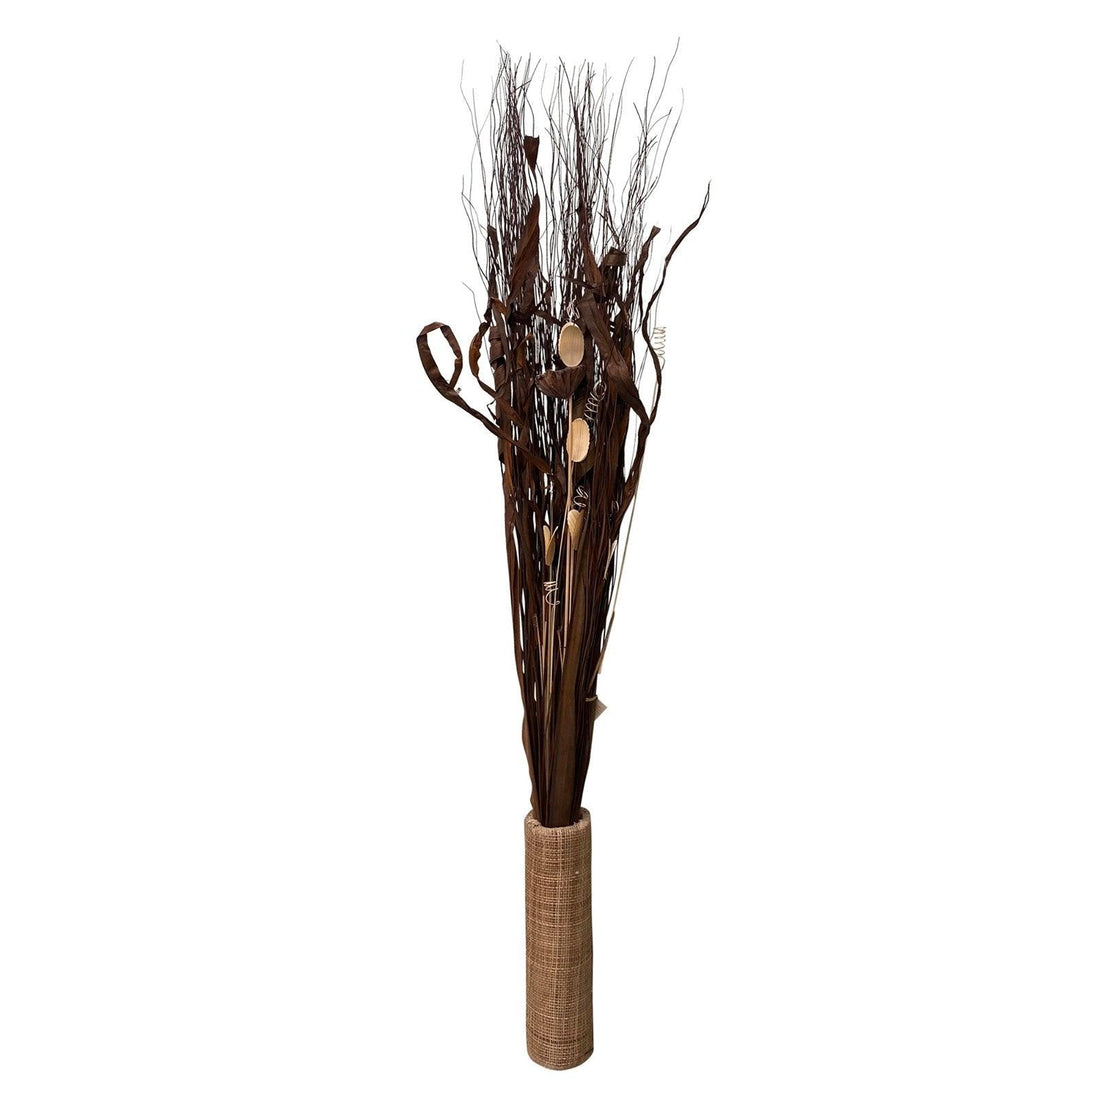 Assorted Leaves & Grasses In A Woven Natural Pot 150cm - £59.99 - Flower Sprays 